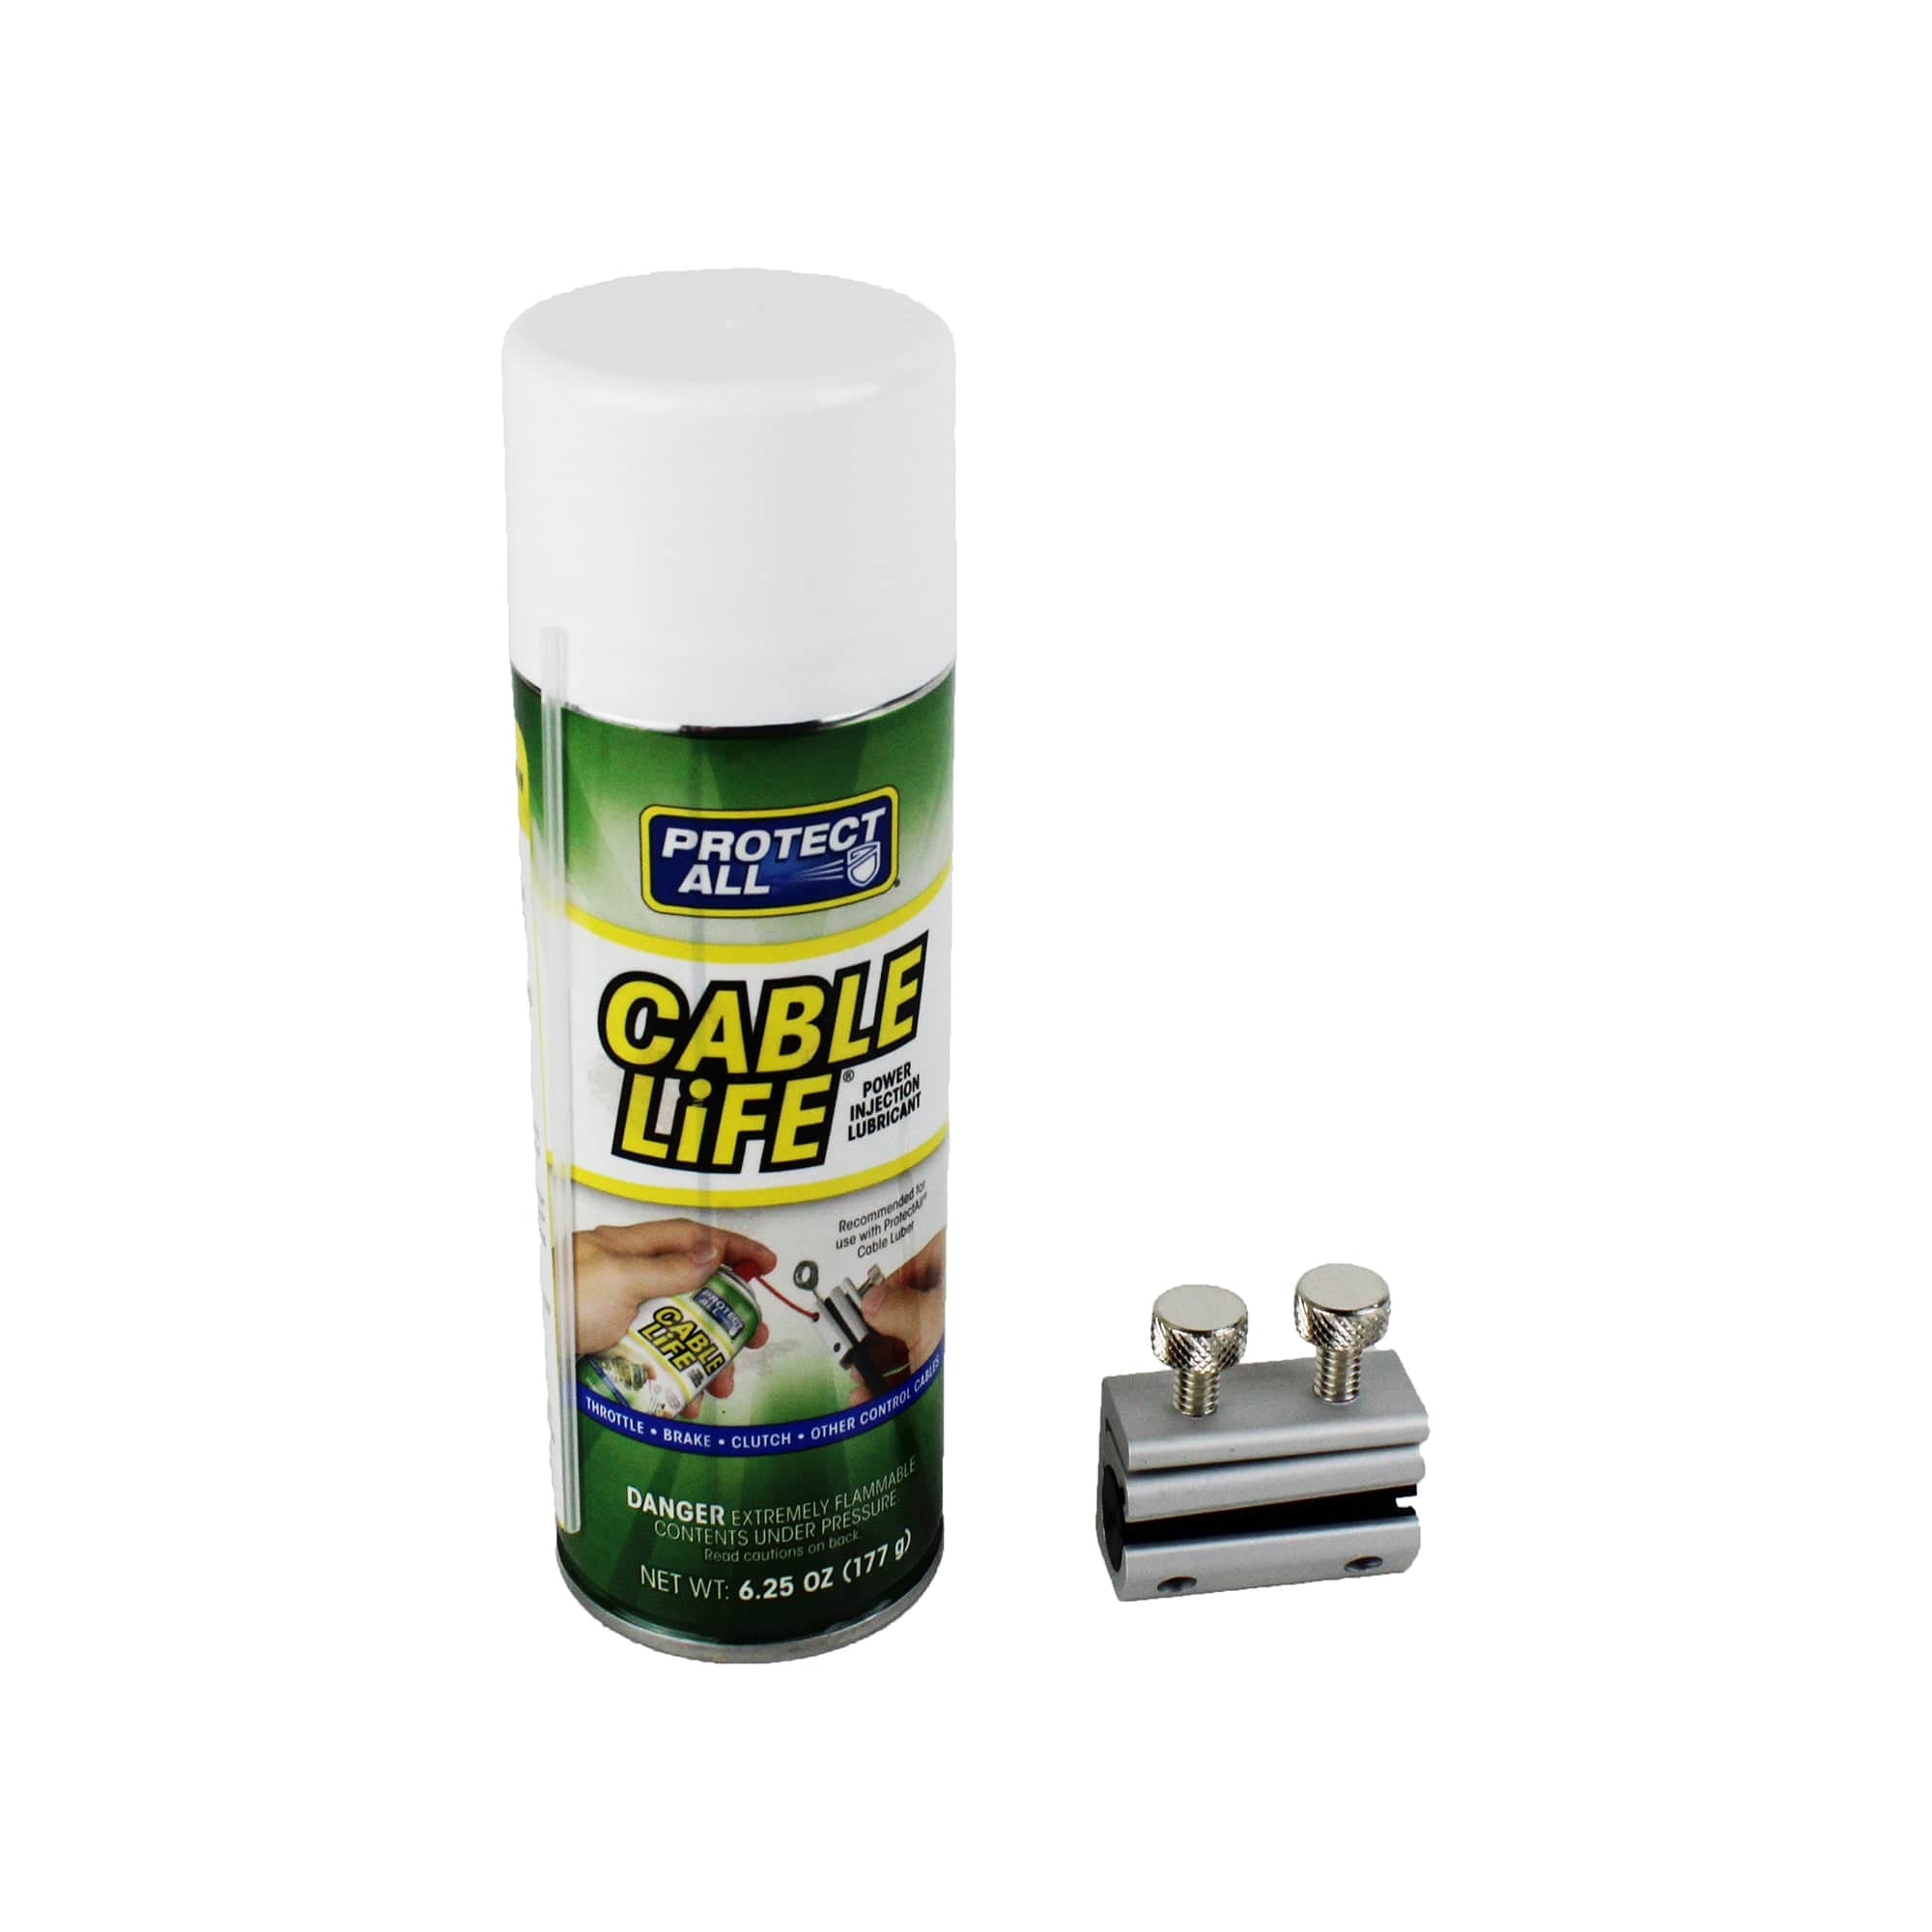 Thetford 20006 Cable Life Lubricant